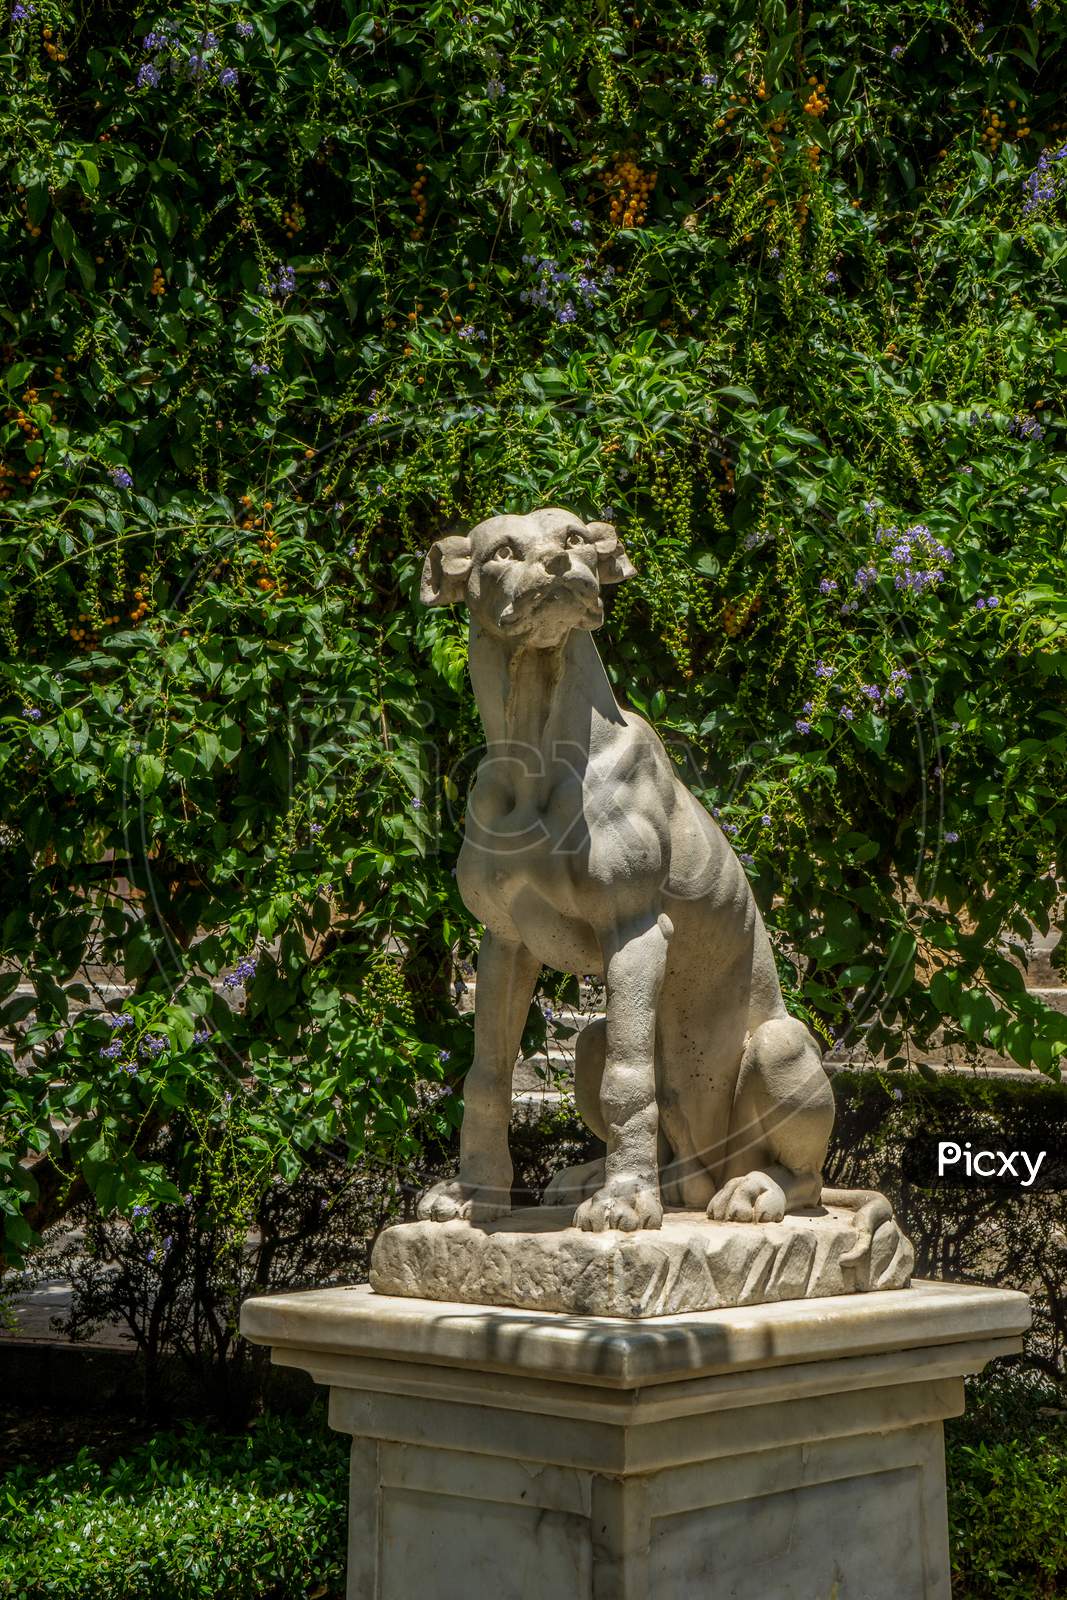 Seville, Spain- June 18, 2017 : A Statue Of A Dog Is Displayed In A Park In Seville, Spain June 2017.